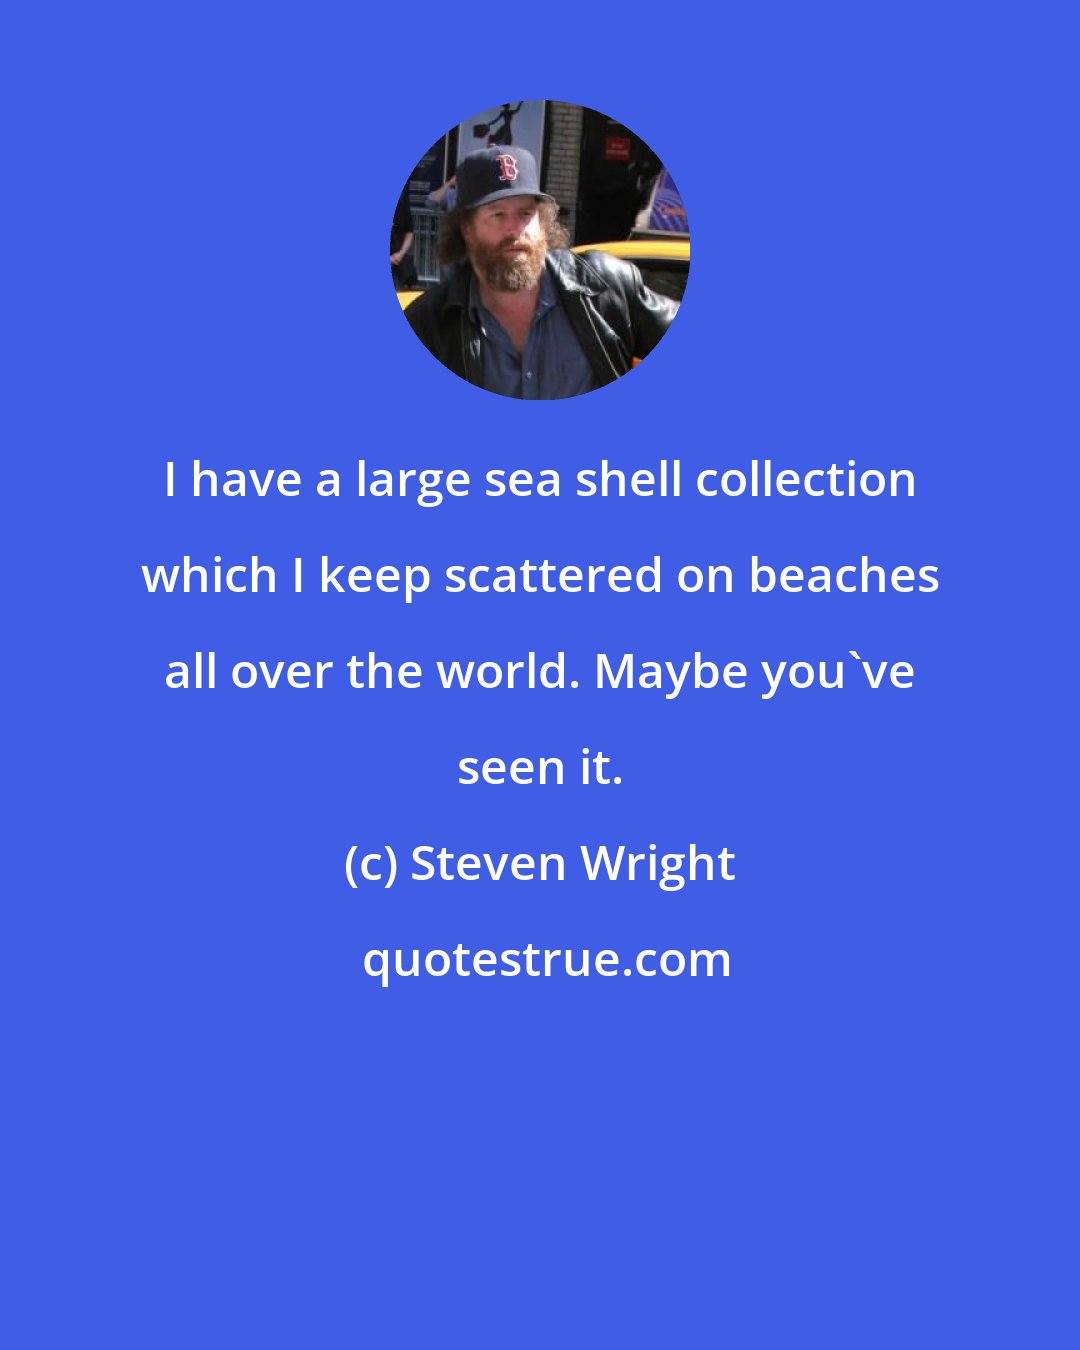 Steven Wright: I have a large sea shell collection which I keep scattered on beaches all over the world. Maybe you've seen it.